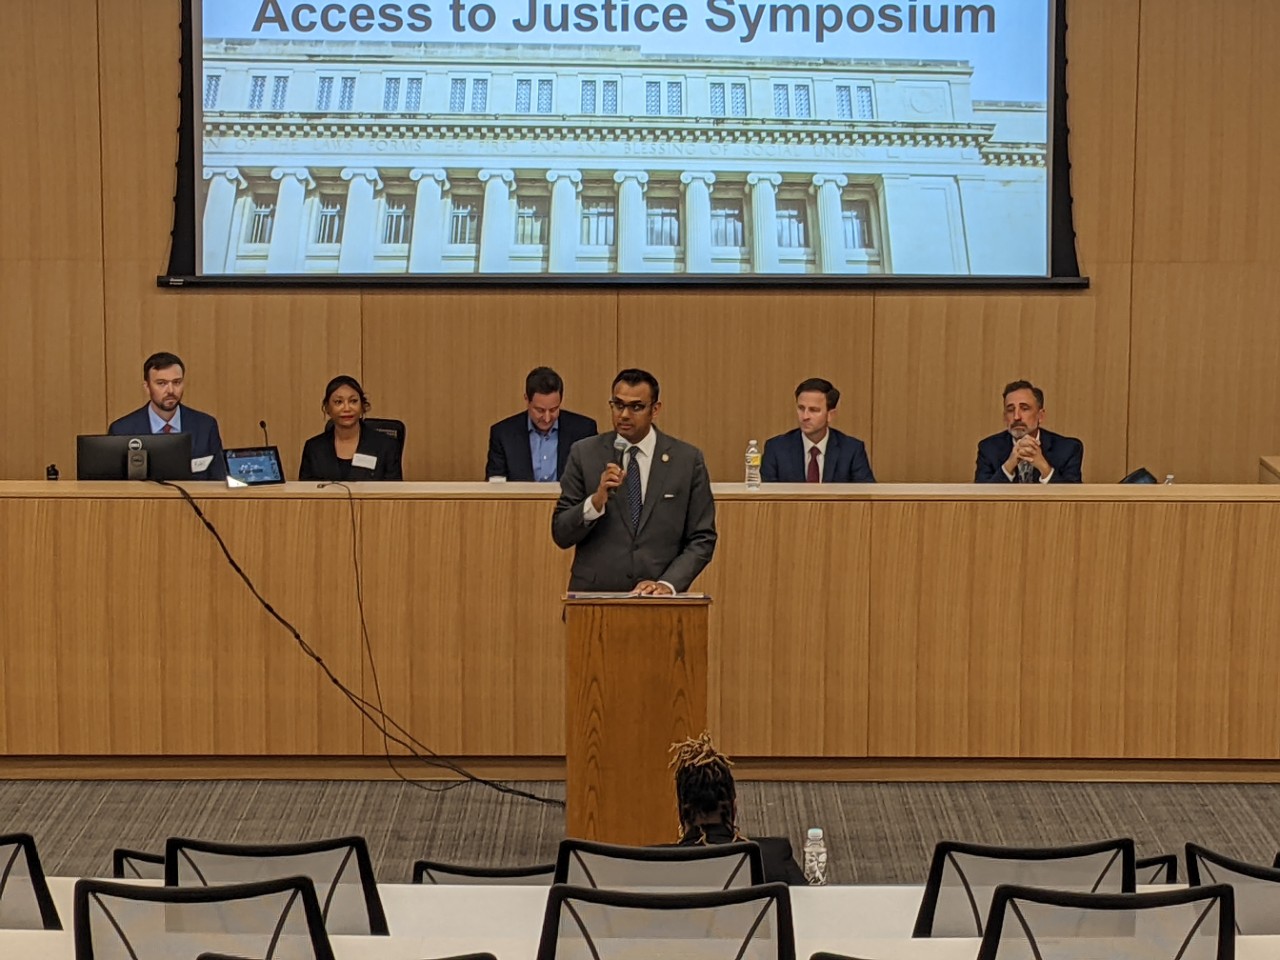 Hamilton County Clerk of Courts Pavan Parikh speaks at the Access to Justice symposium at UC Law.